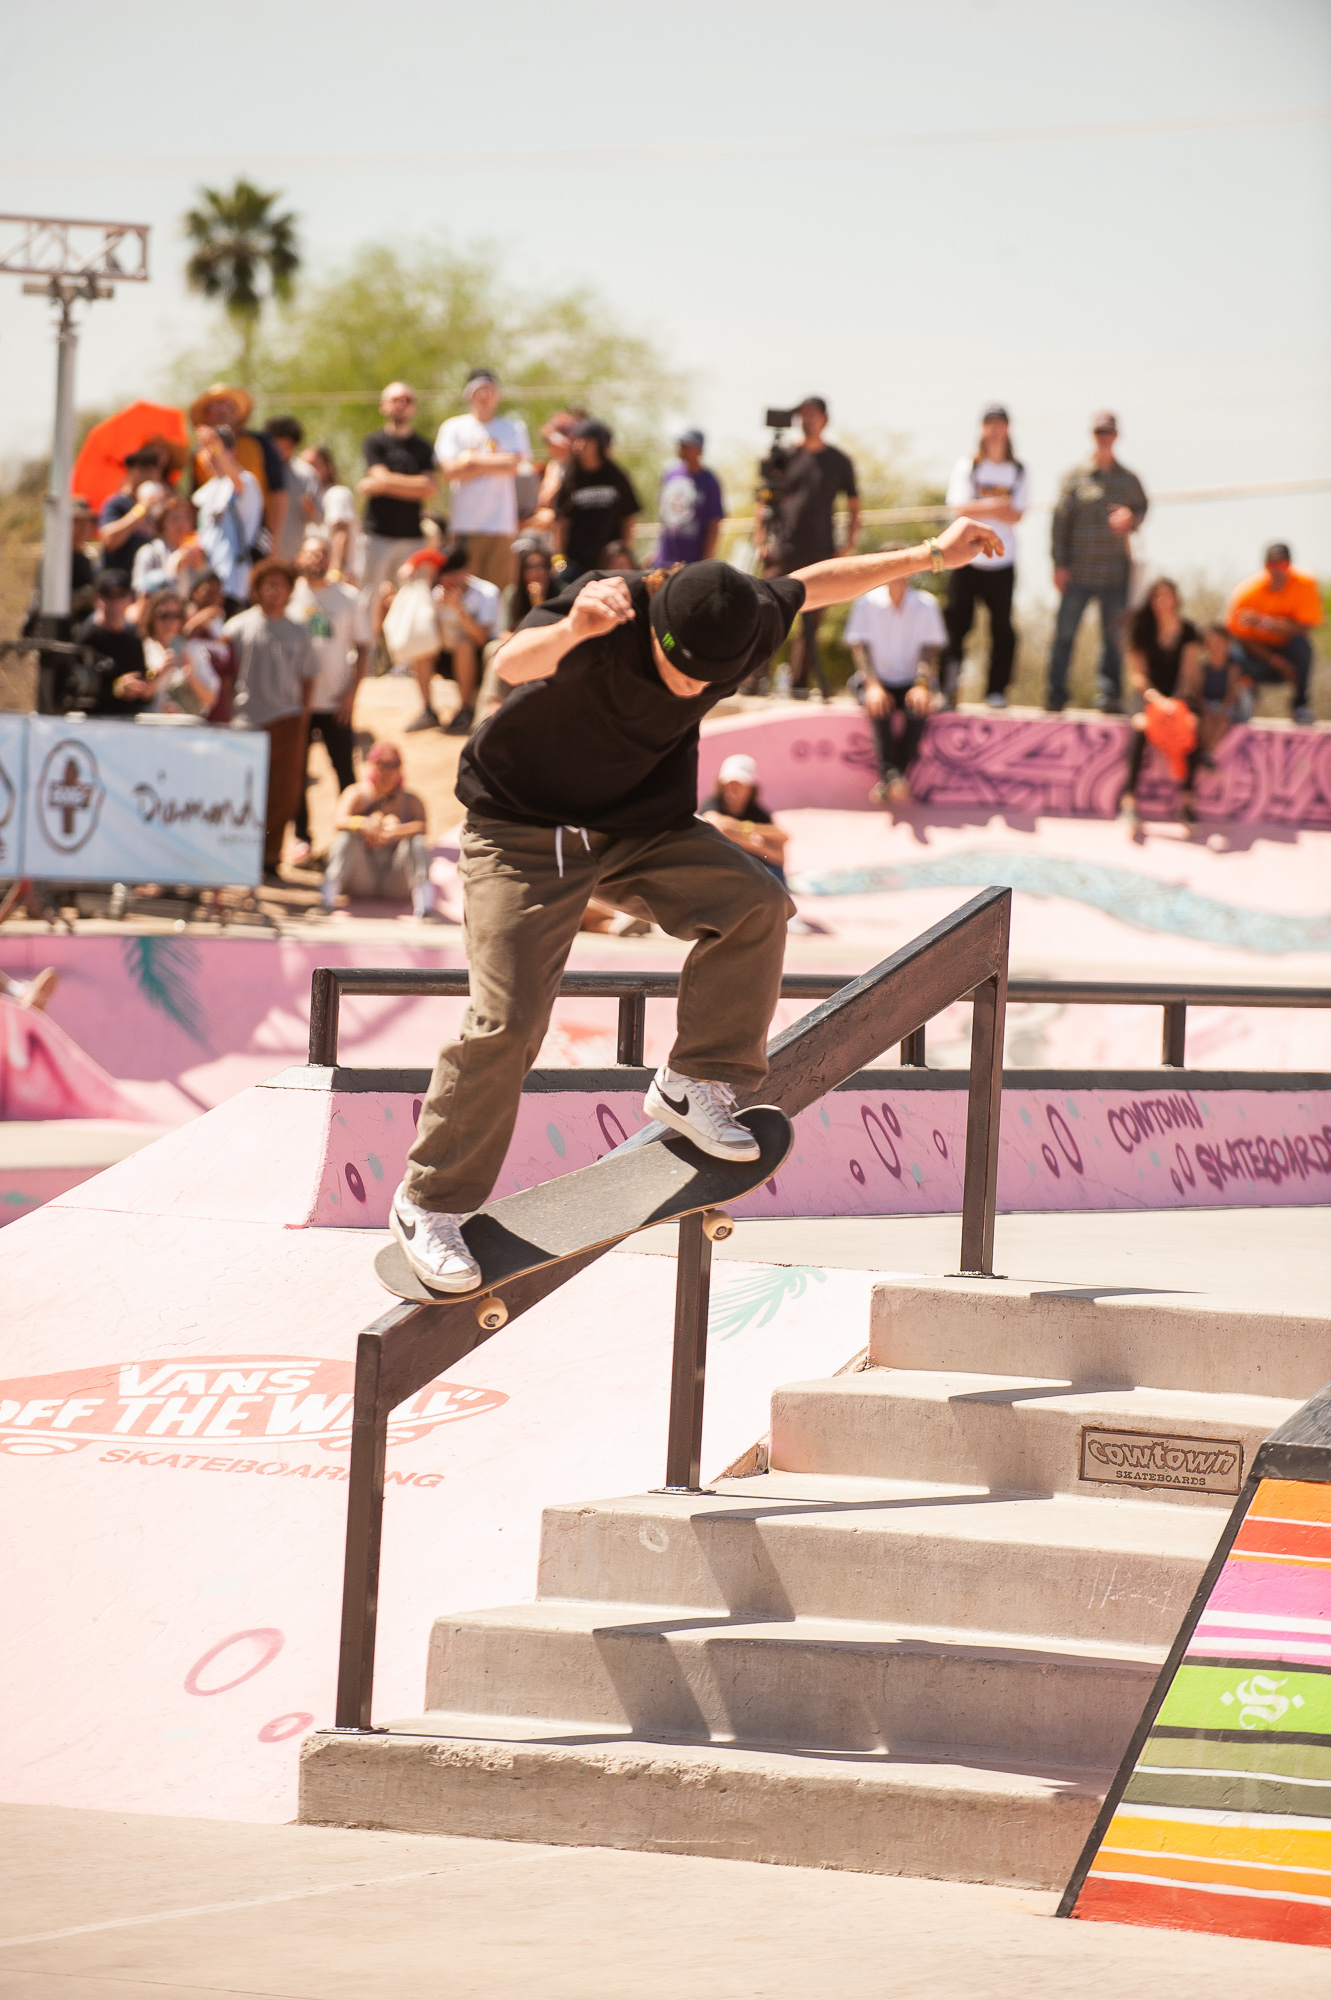 Monster Energy's Kieran Woolley Will Compete in Men's Skateboard Park at X Games Chiba 2022